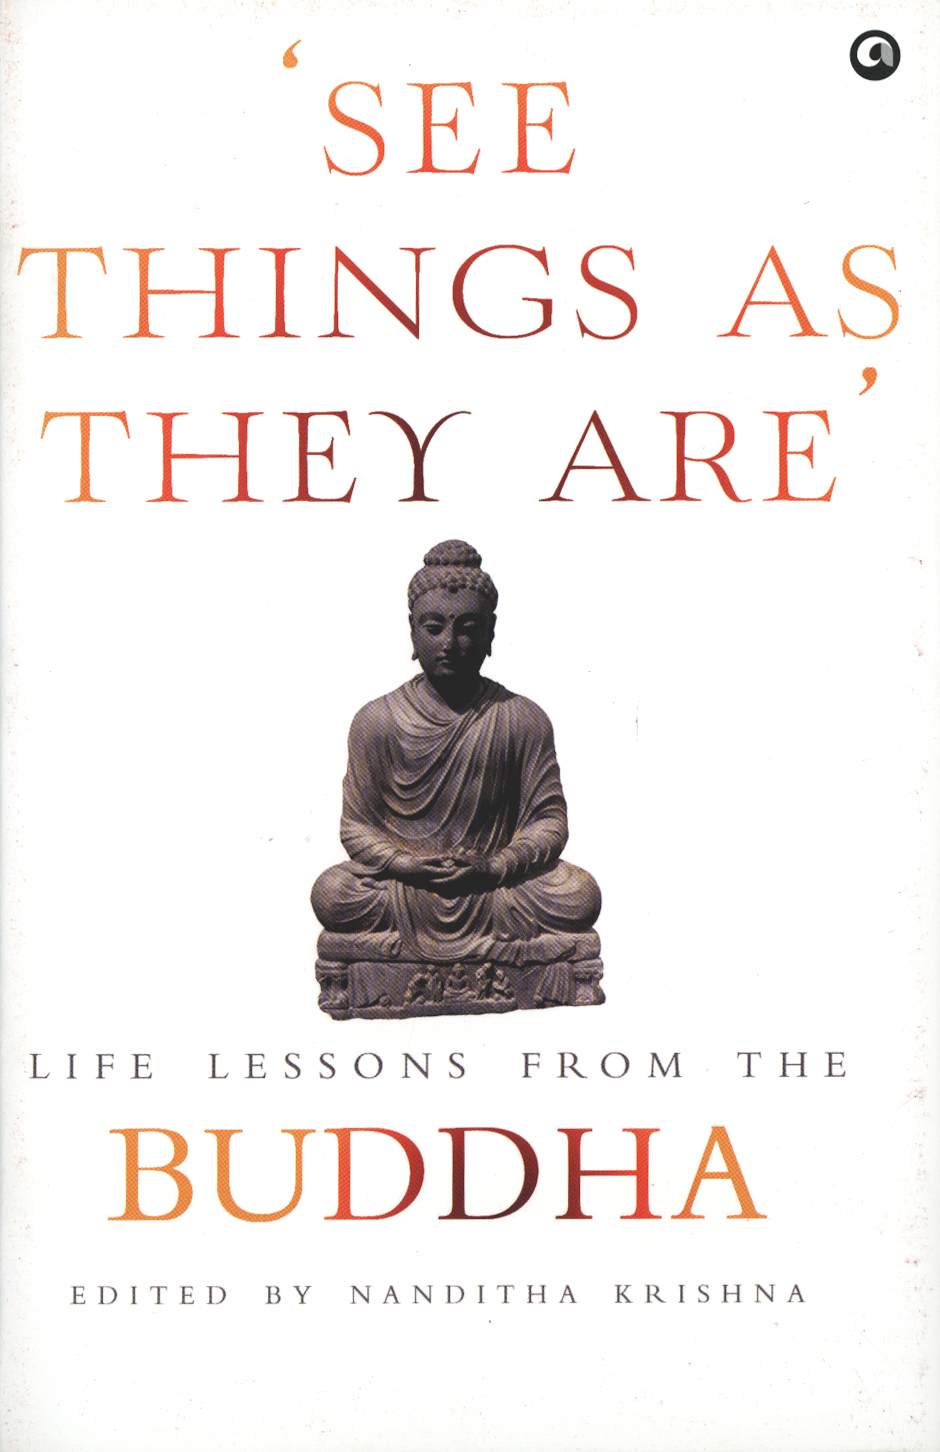 LIFE LESSONS FROM THE BUDDHA